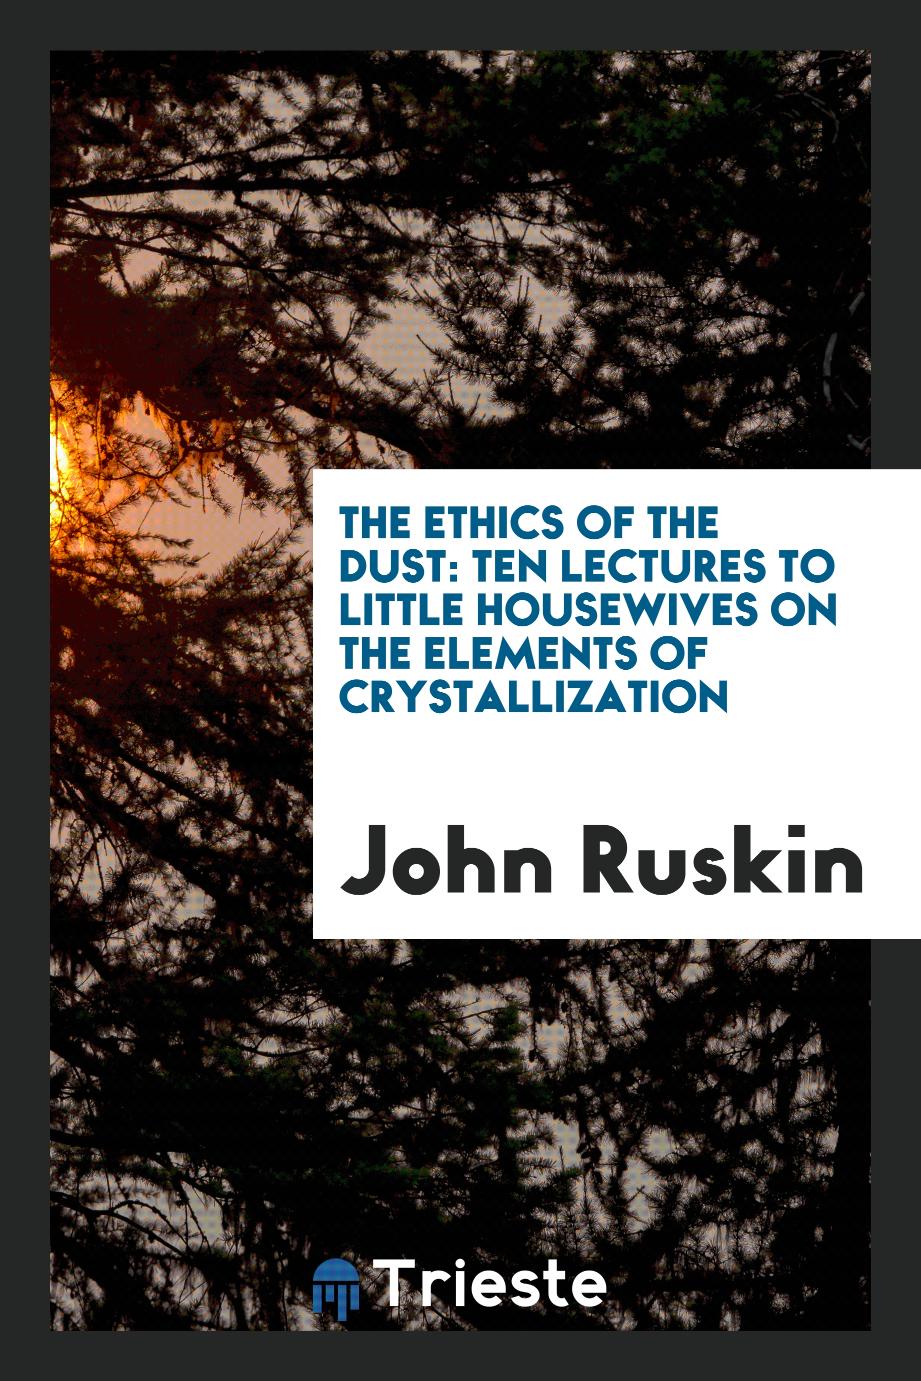 The Ethics of the Dust: Ten Lectures to Little Housewives on the Elements of Crystallization